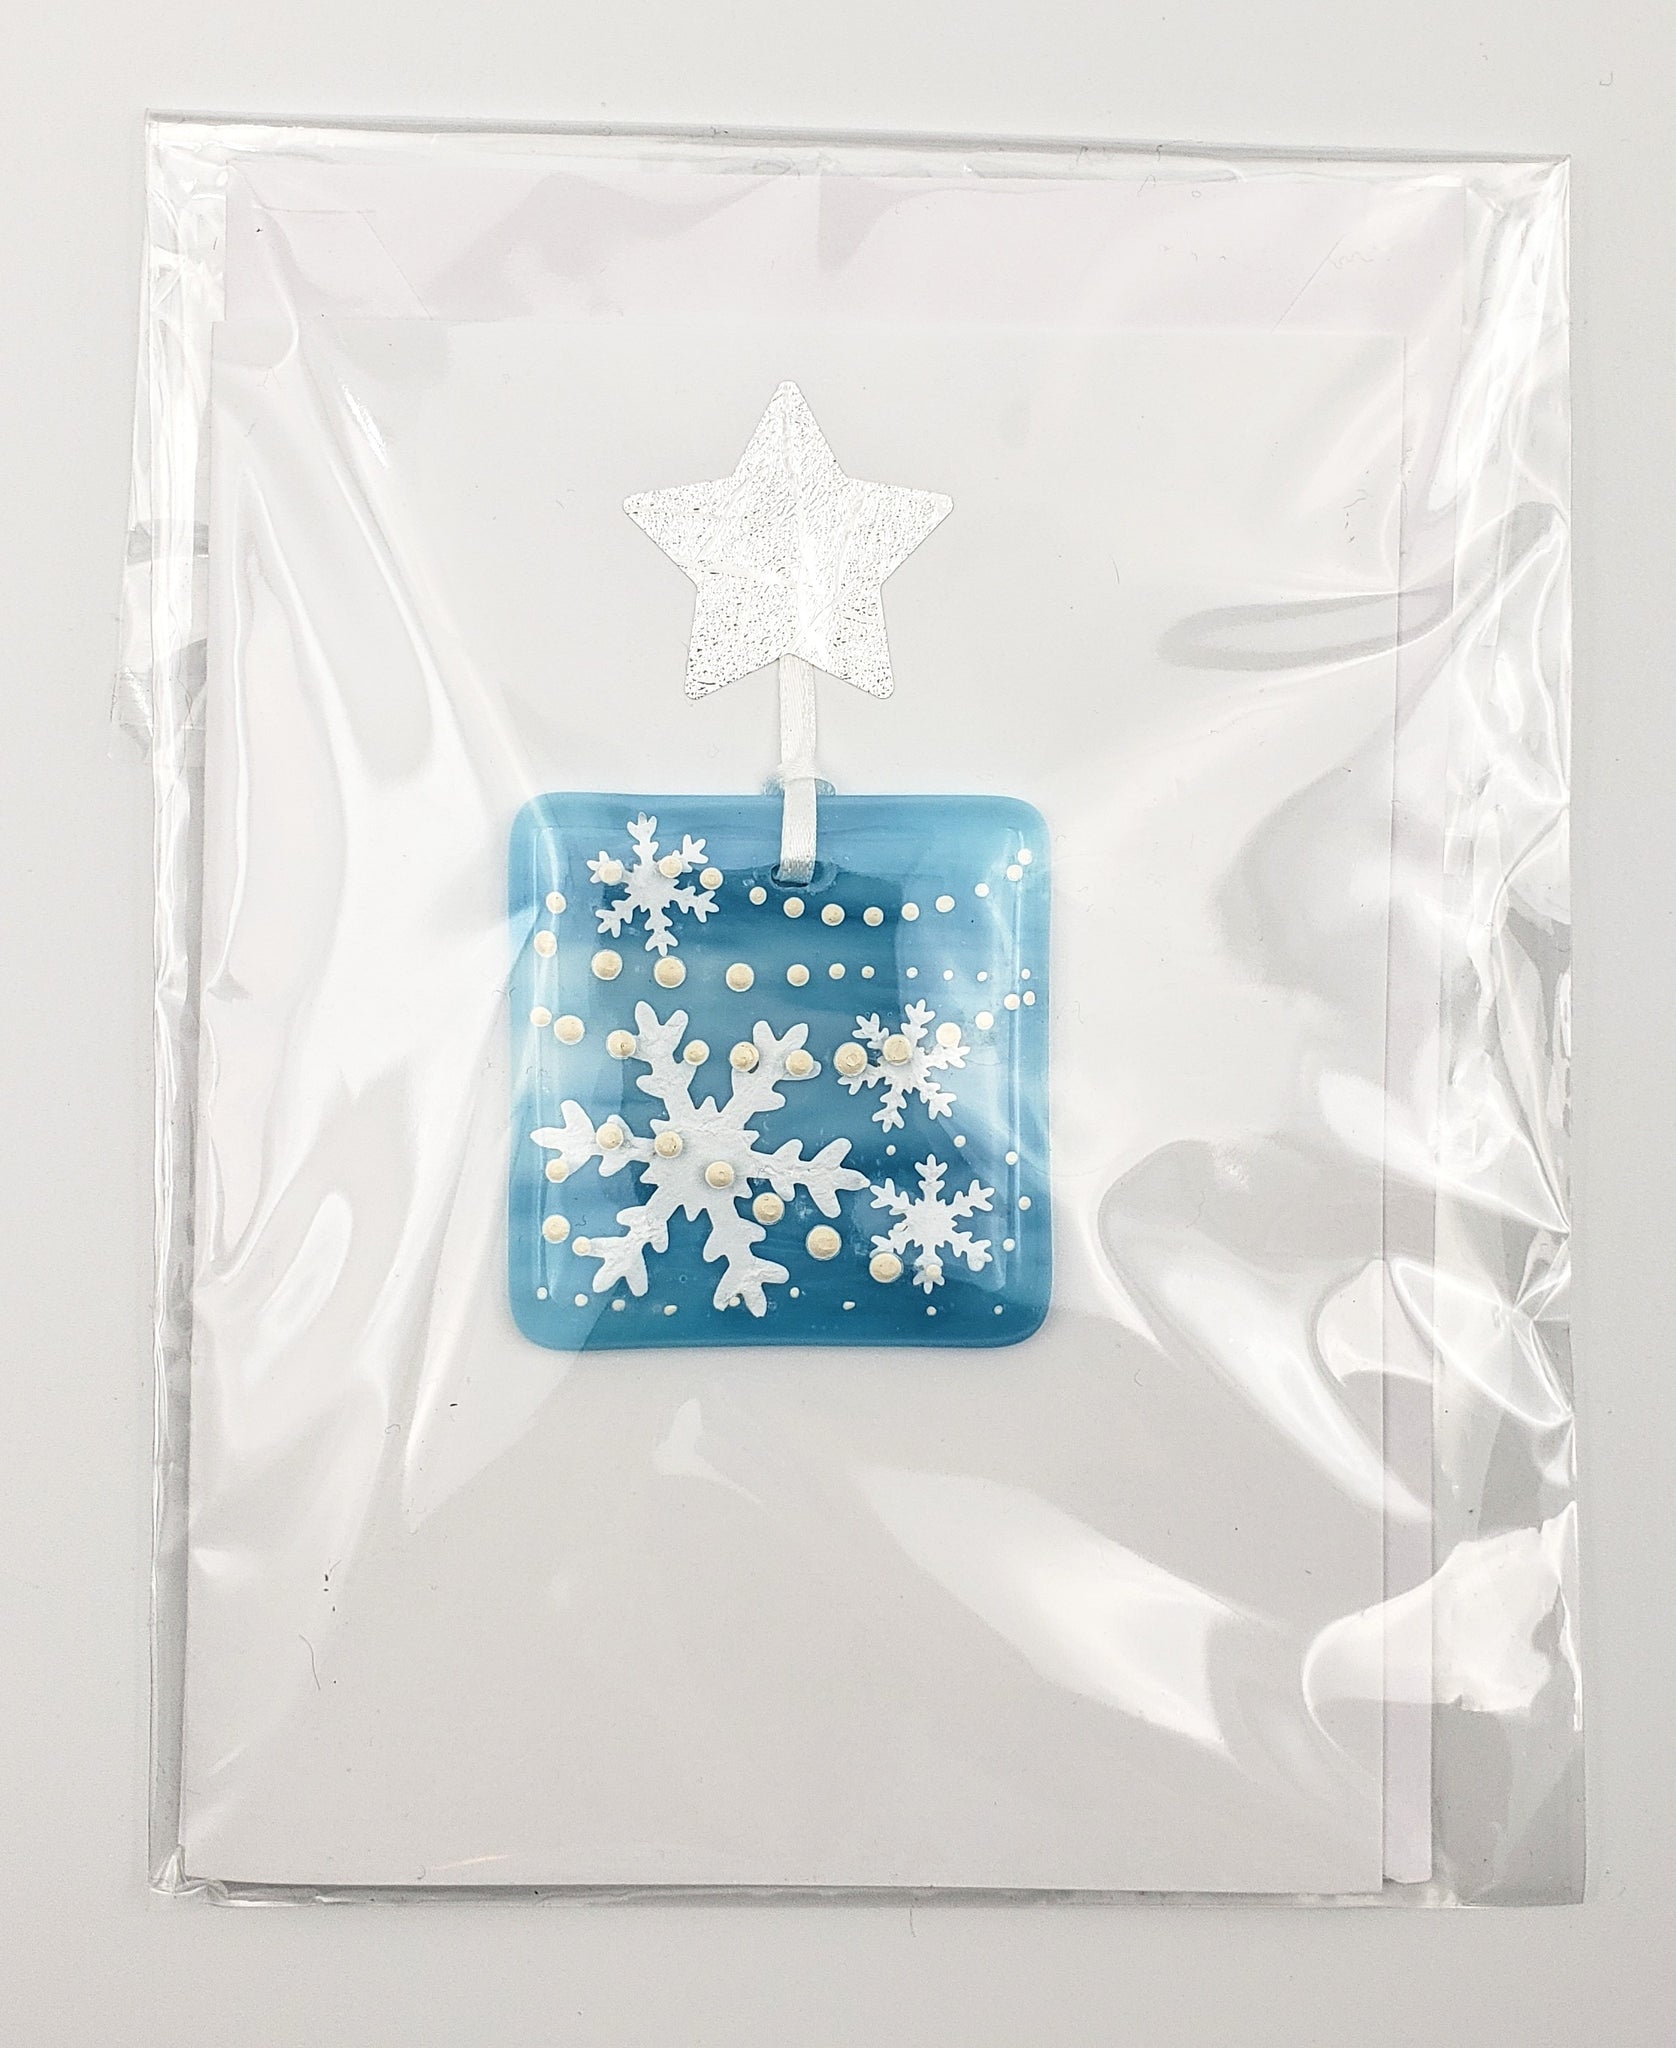 Hanging ornament greeting card #8